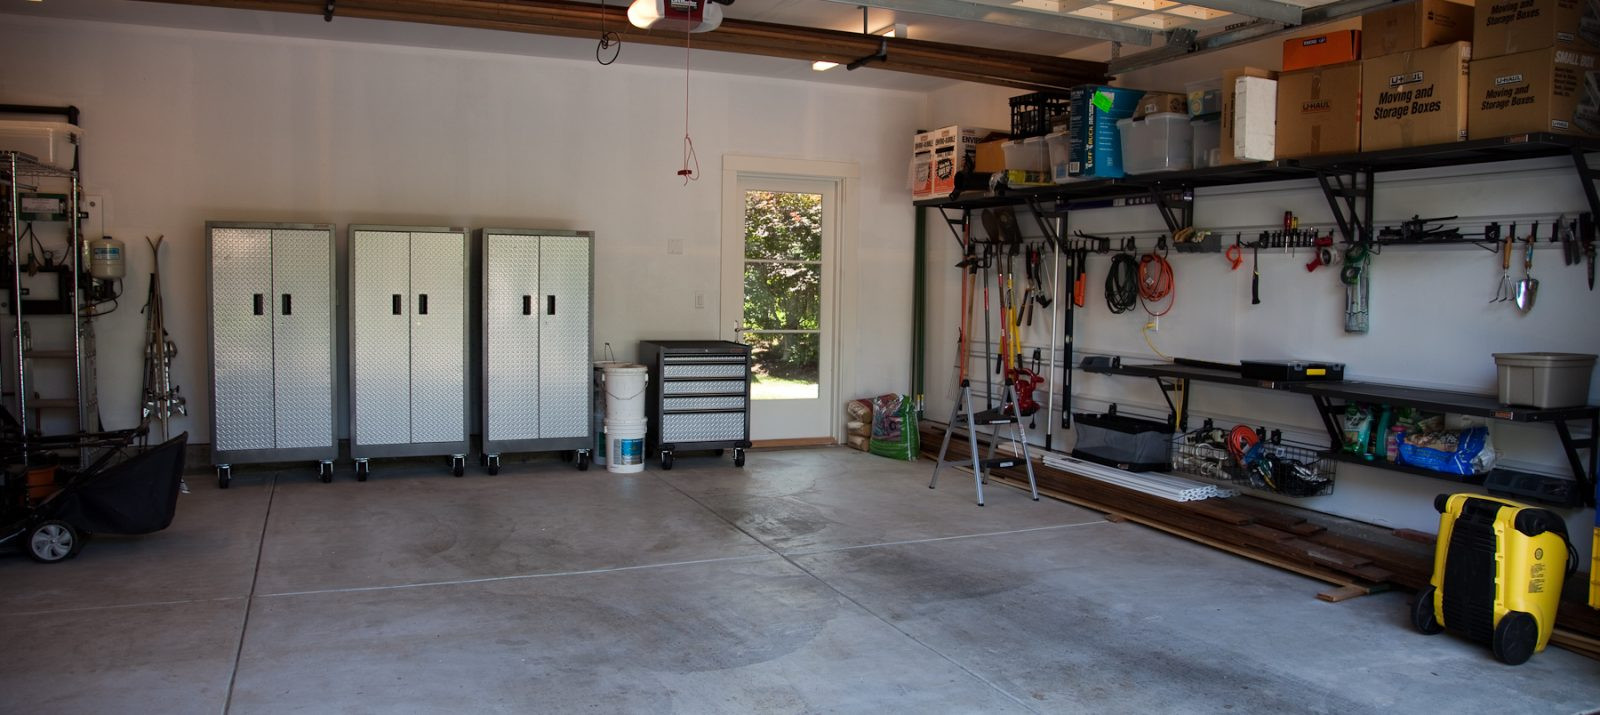 Garage Cleaning And Organizing
 How To Easily Clean And Organize Your Garage [Infographic]